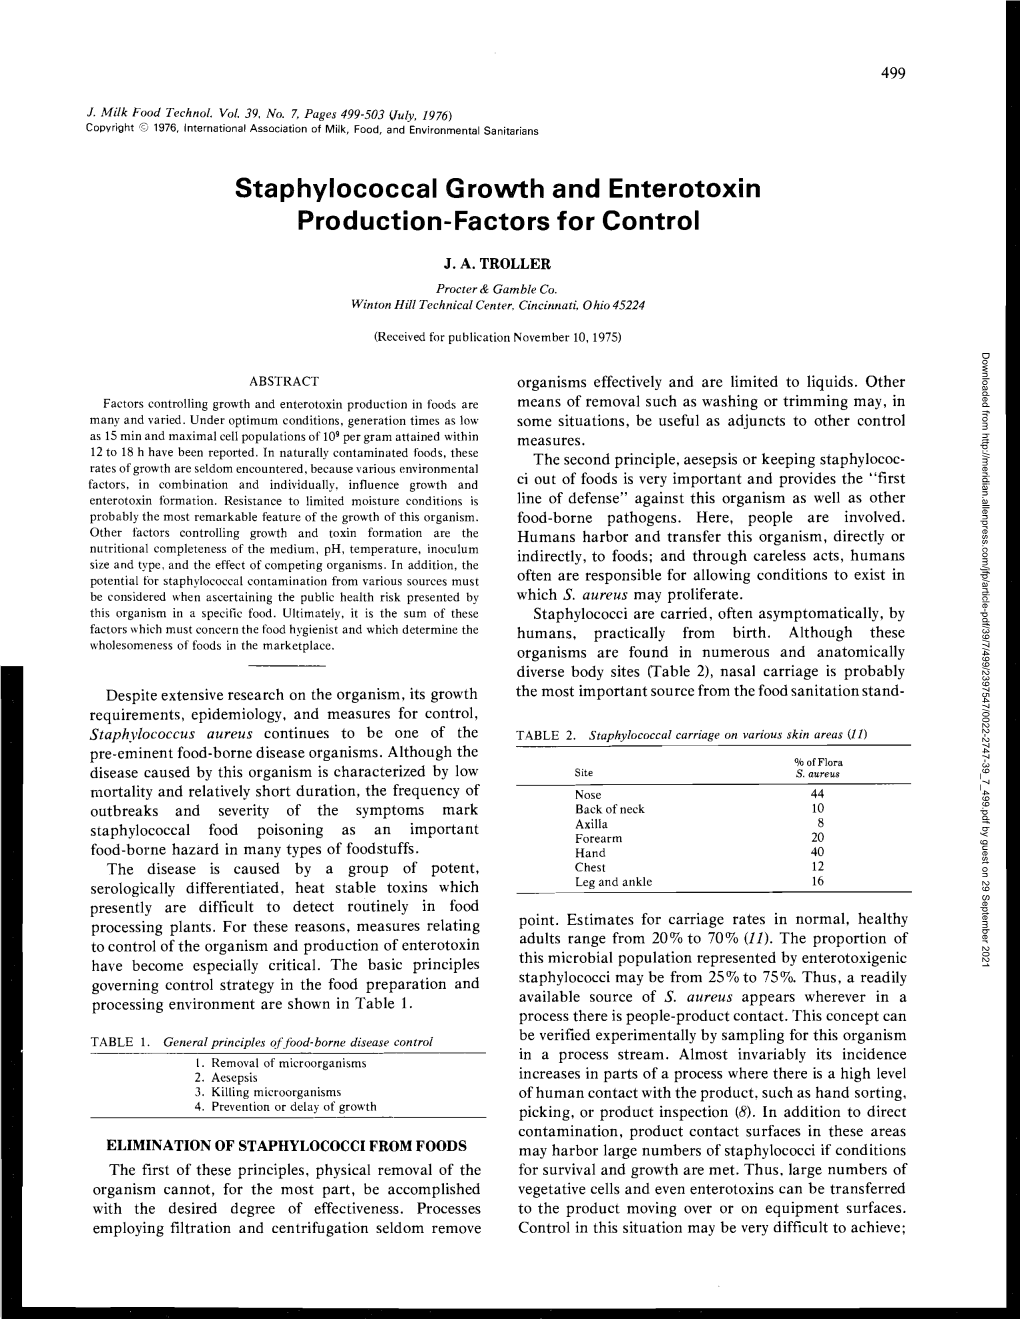 Staphylococcal Growth and Enterotoxin Production-Factors for Control